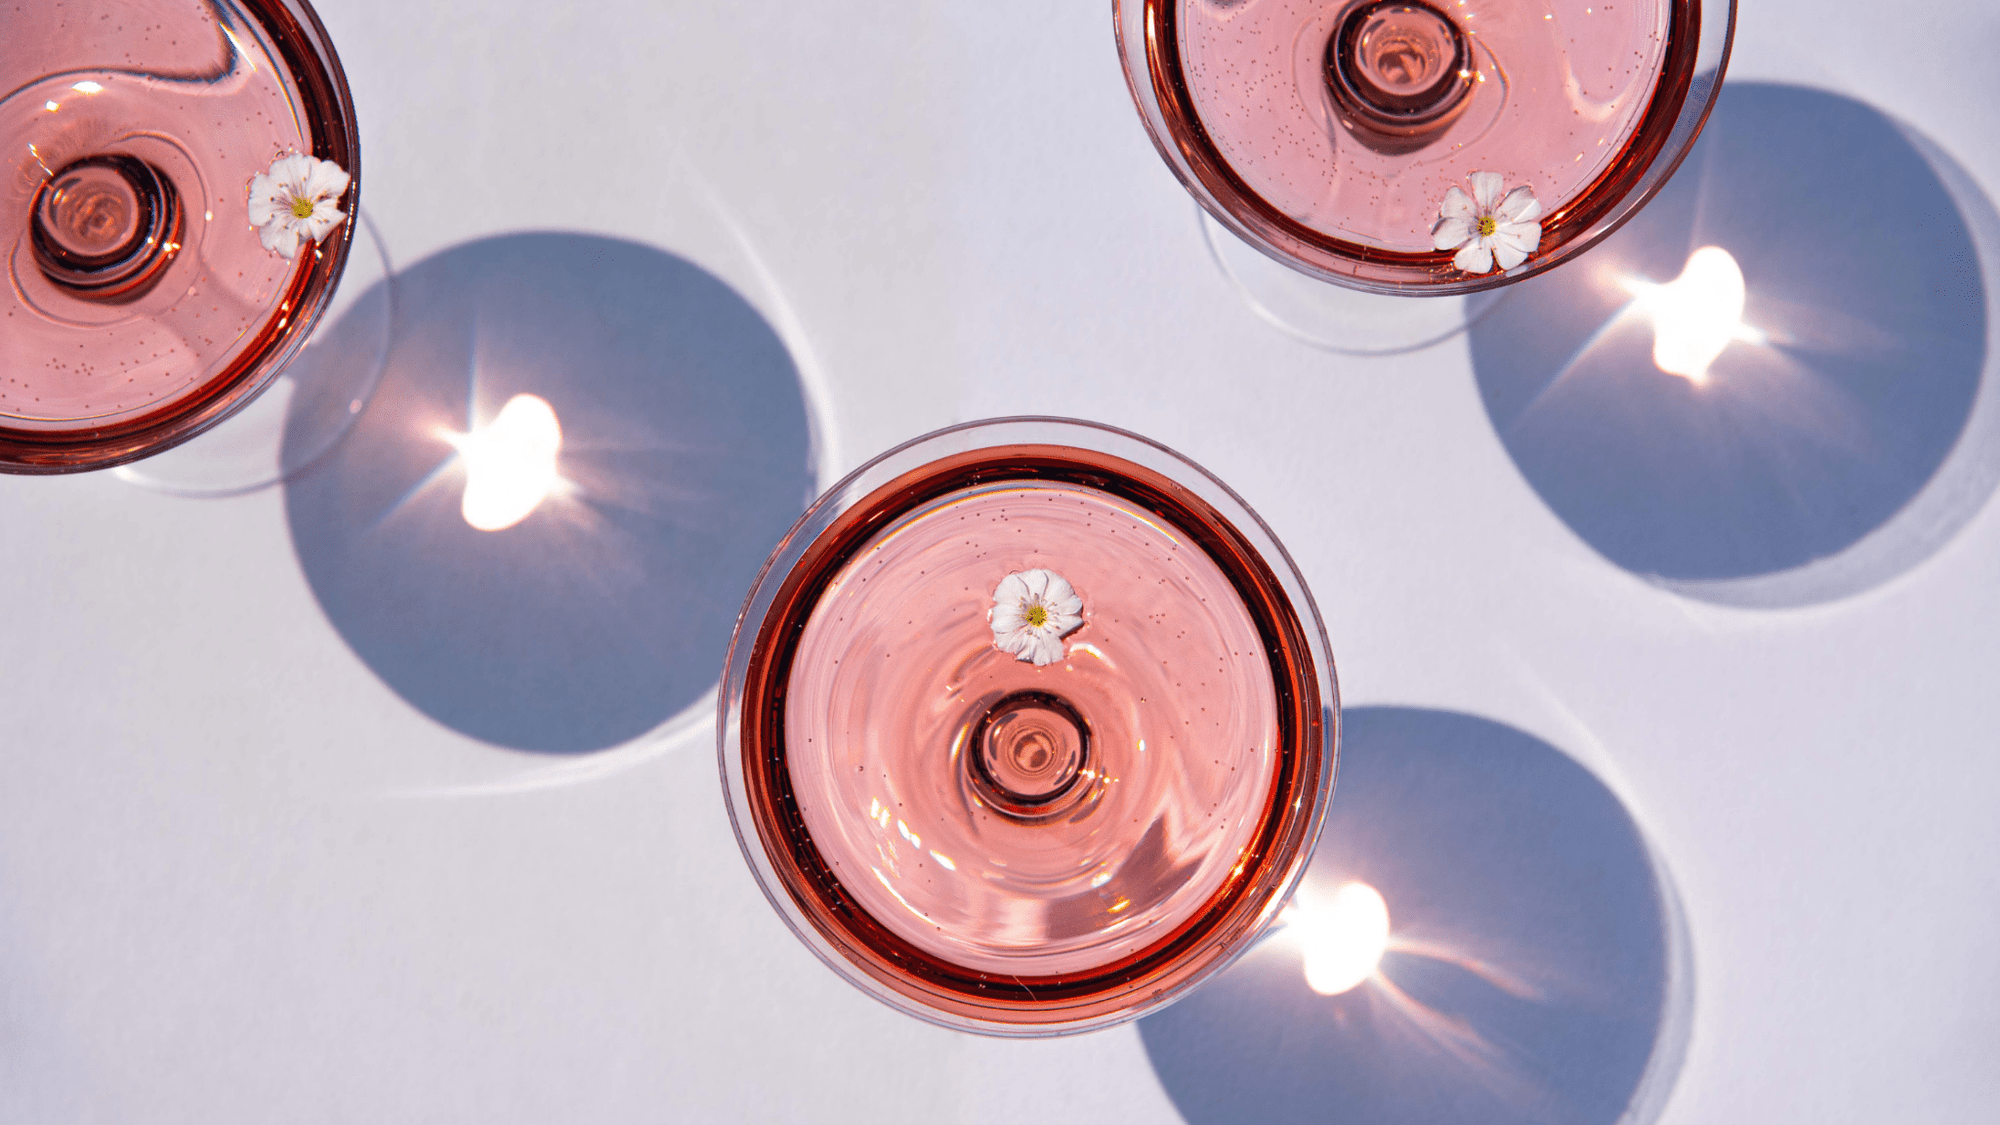 Rosé wines to toast to summer, watch Barbie, and enjoy life in Pink - Boisson